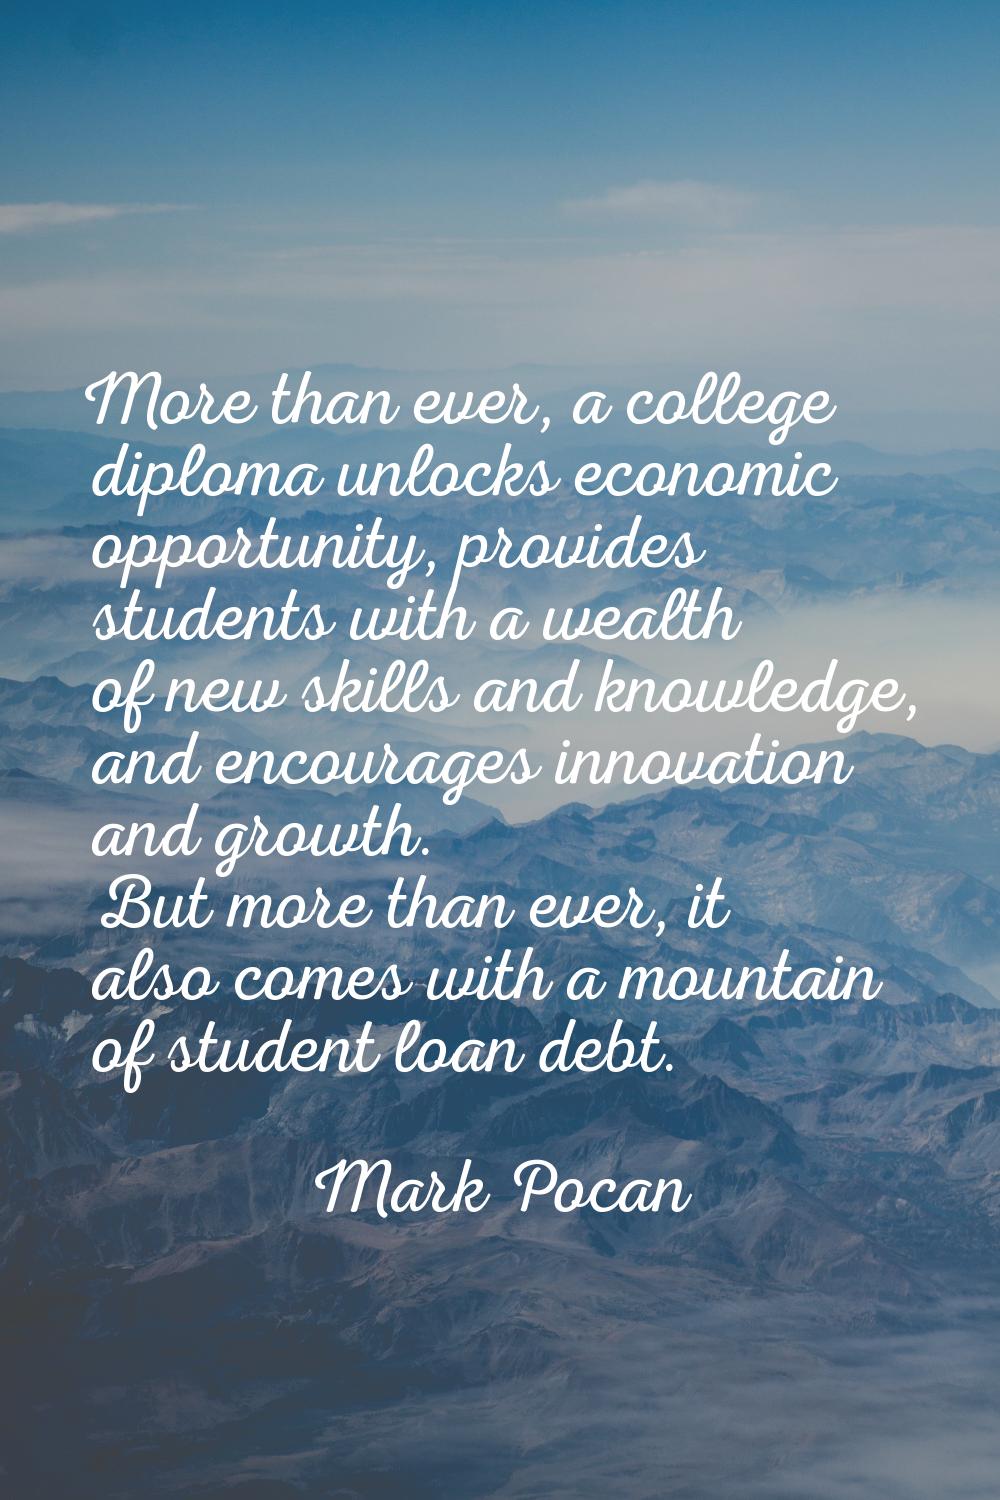 More than ever, a college diploma unlocks economic opportunity, provides students with a wealth of 